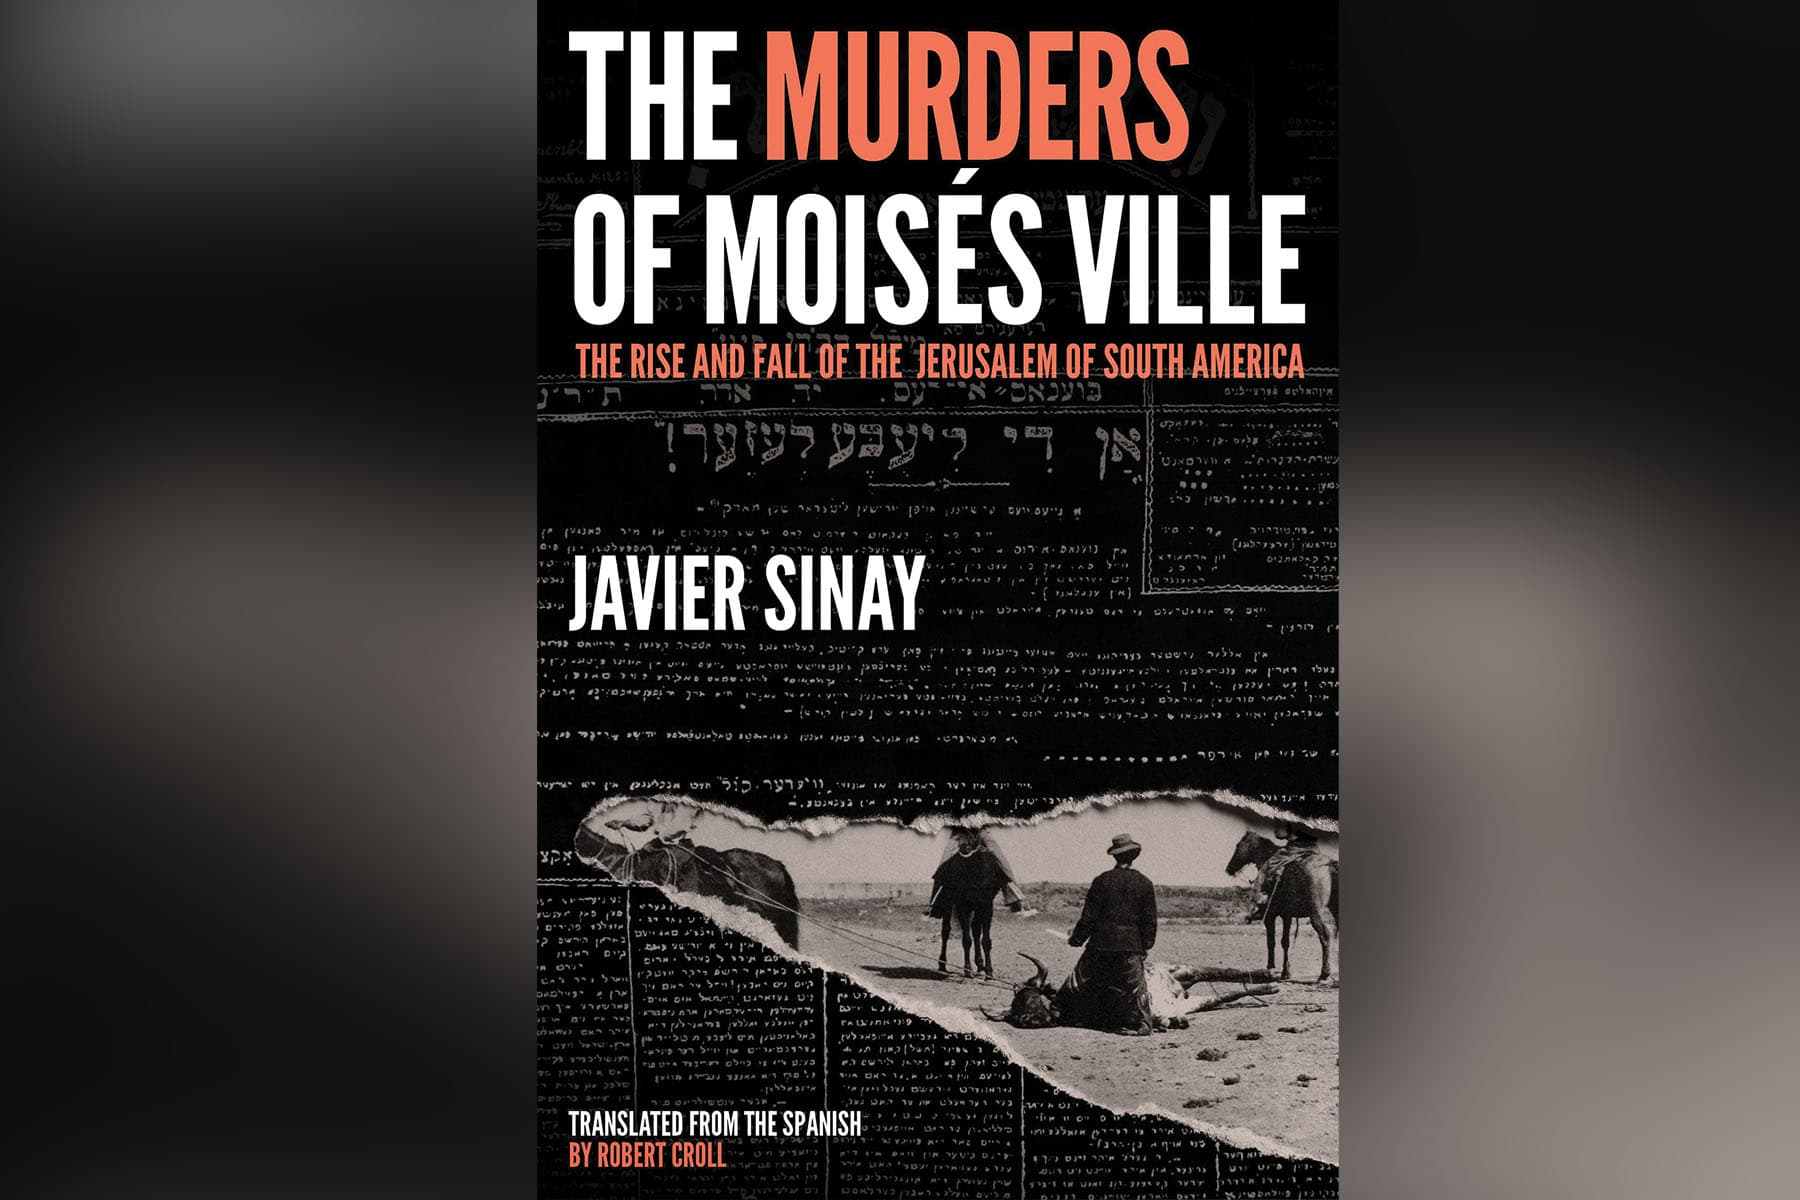 New Book Explores Cold Case Murders at a Jewish Farming Colony in Argentina